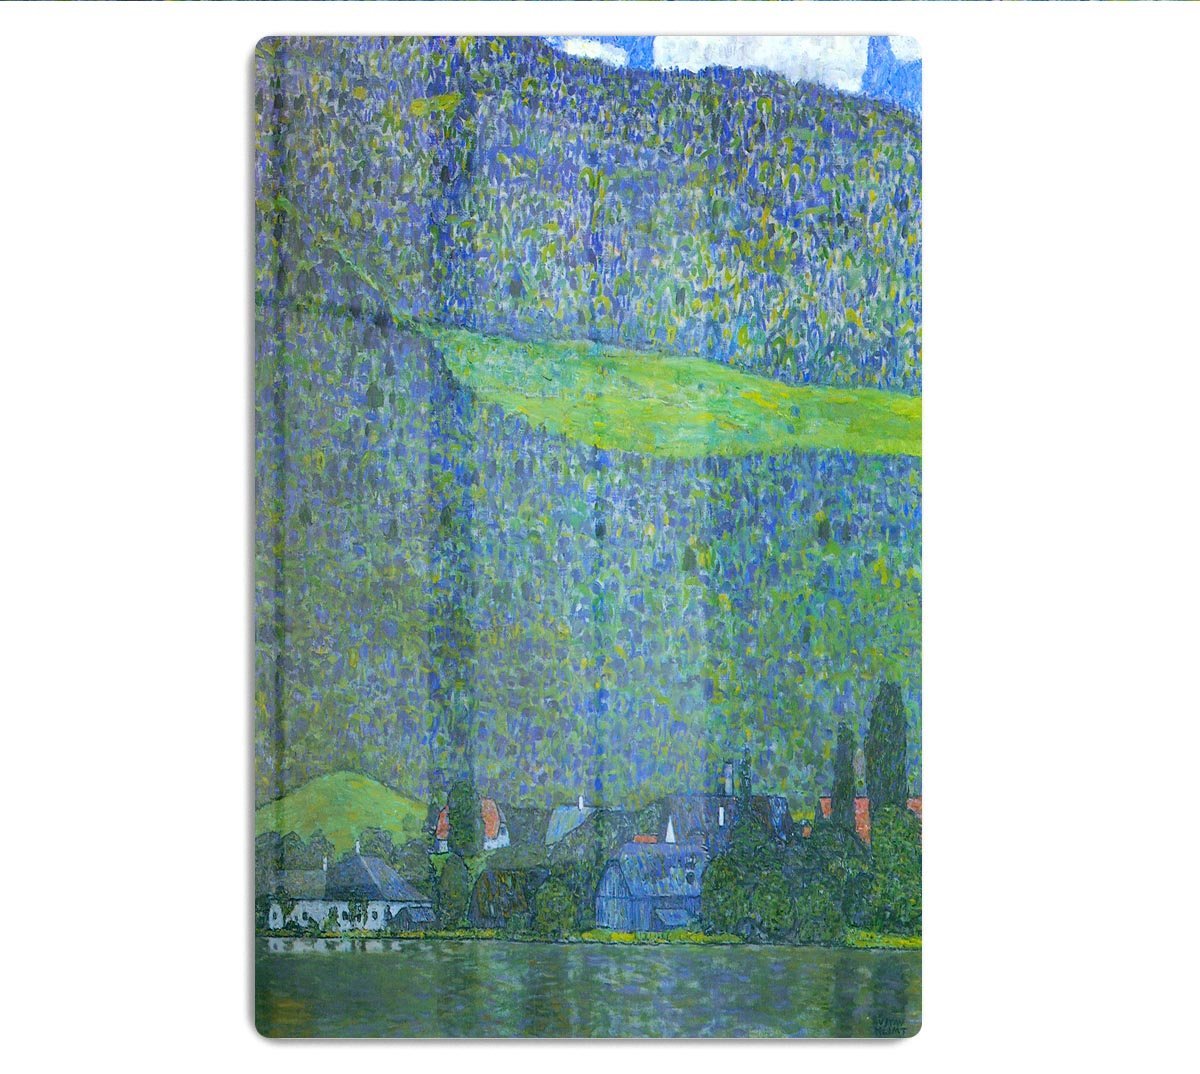 Unterach at the Attersee by Klimt HD Metal Print